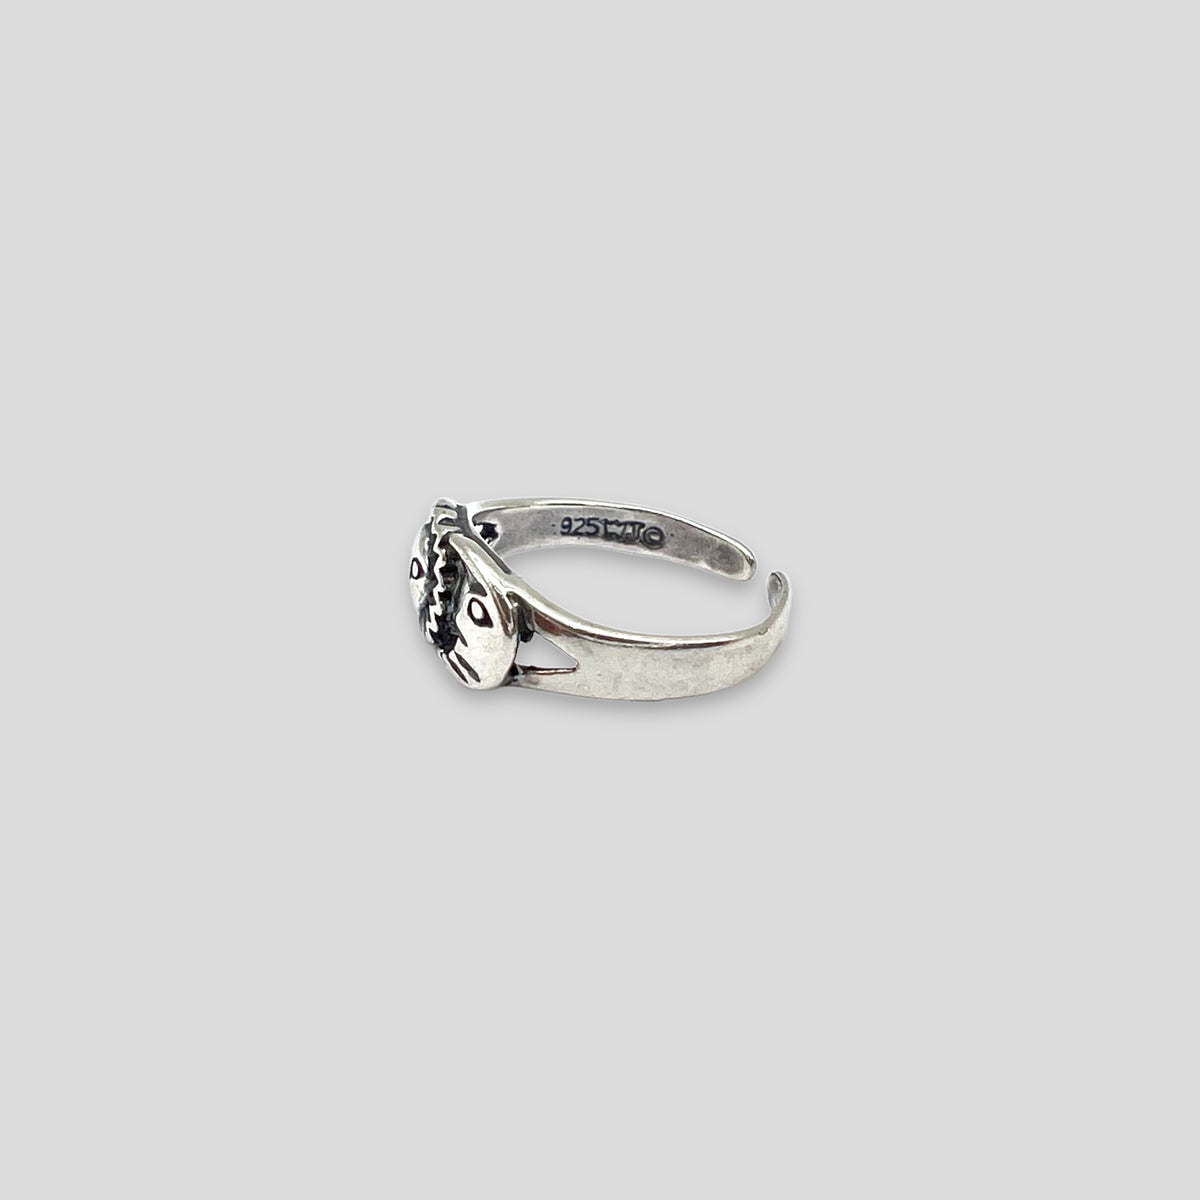 Moon and Sun Sterling Silver Toe Ring